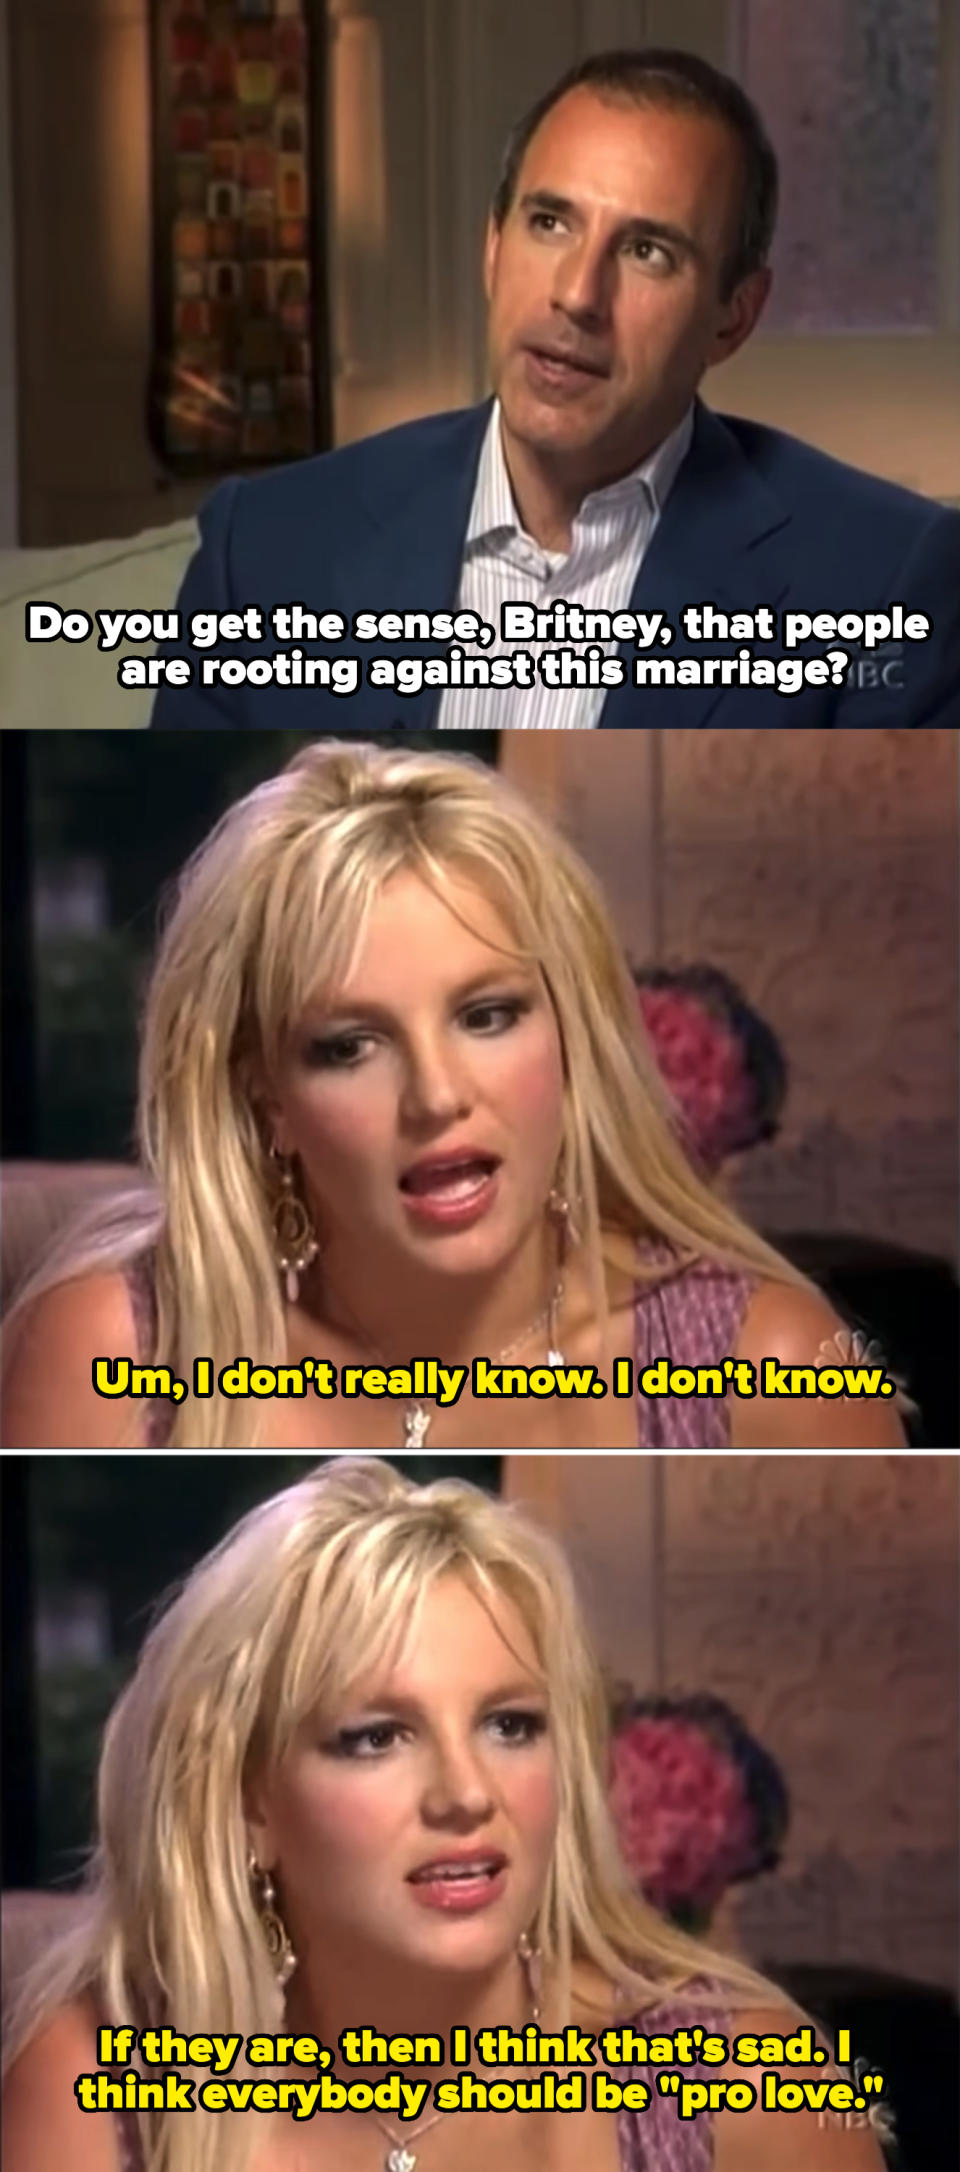 Britney says she doesn't know if people are rooting against the marriage, but "if they are, I think that's sad; I think everybody should be 'pro love'"